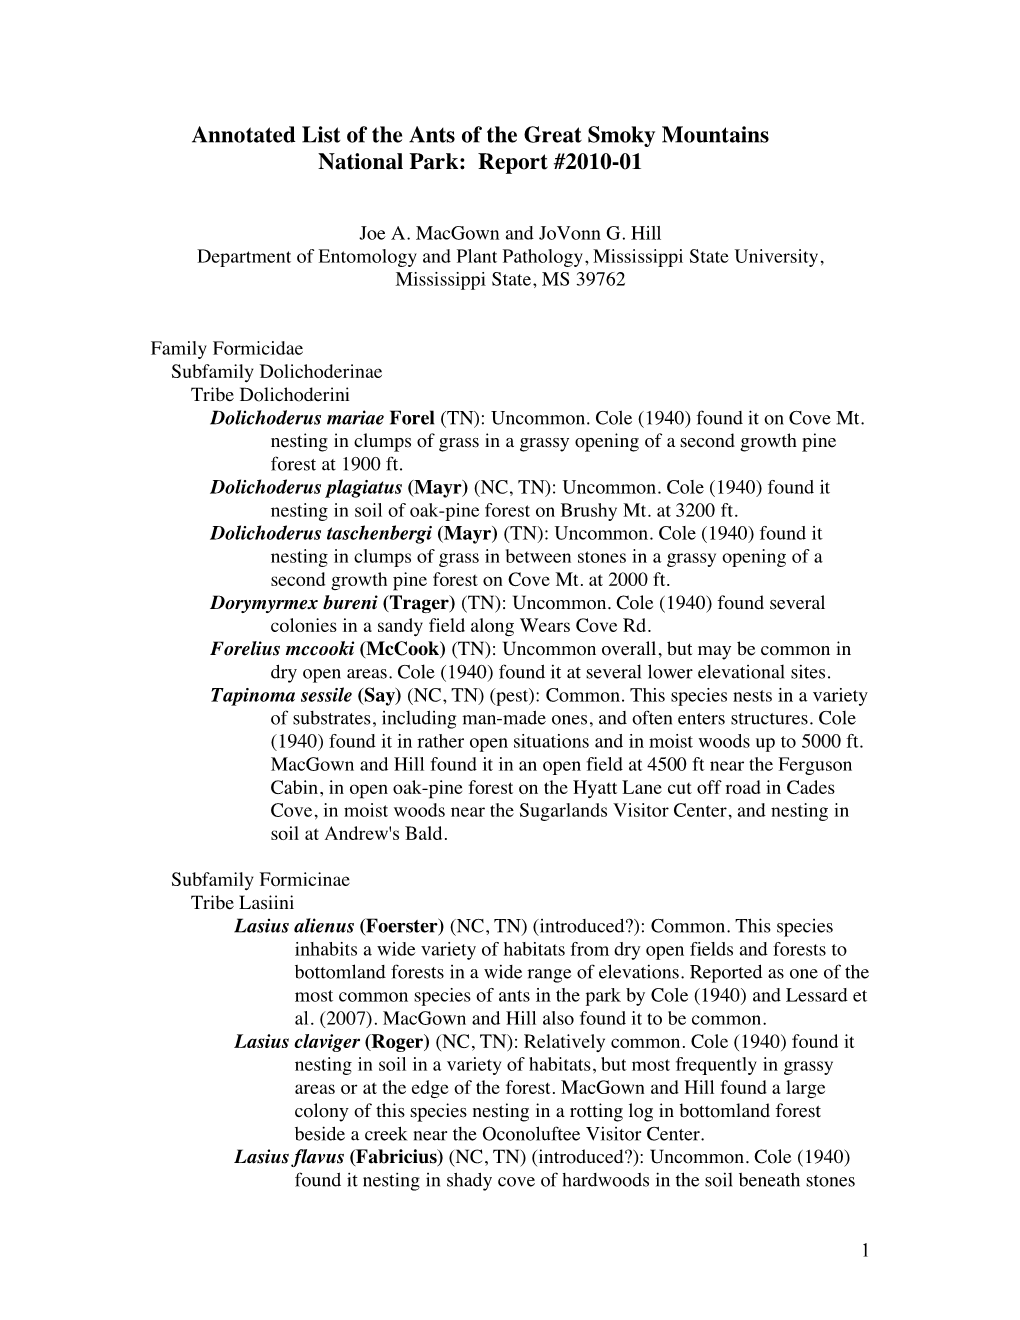 Annotated List of the Ants of the Great Smoky Mountains National Park: Report #2010-01